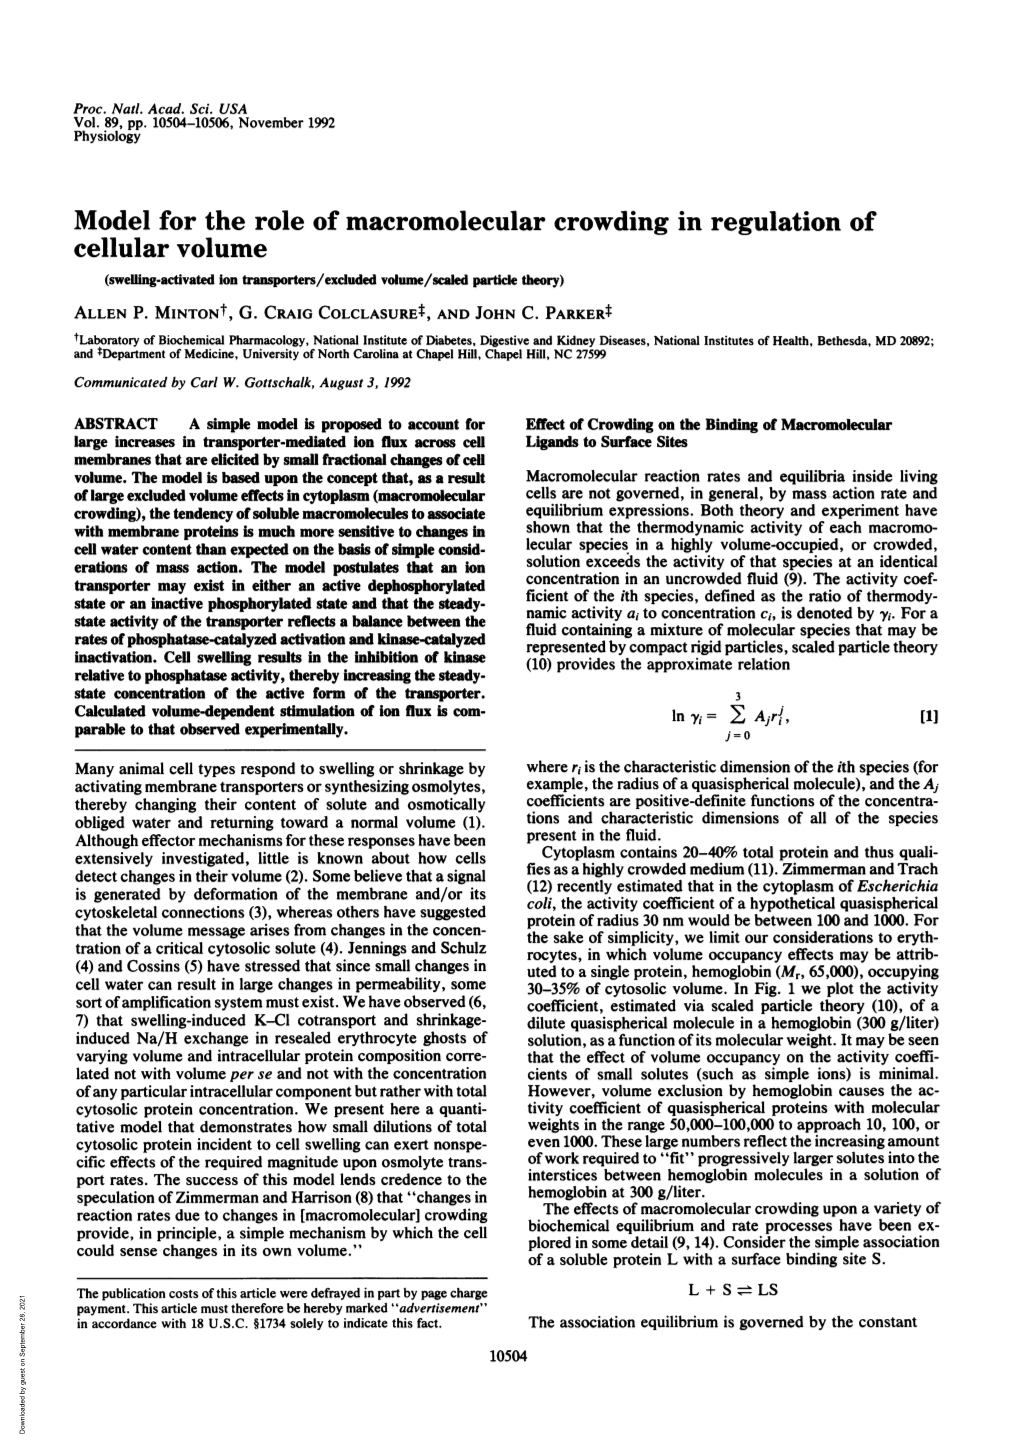 Cellular Volume (Swelling-Activated Ion Transporters/Exduded Volume/Scaled Particle Theory) ALLEN P